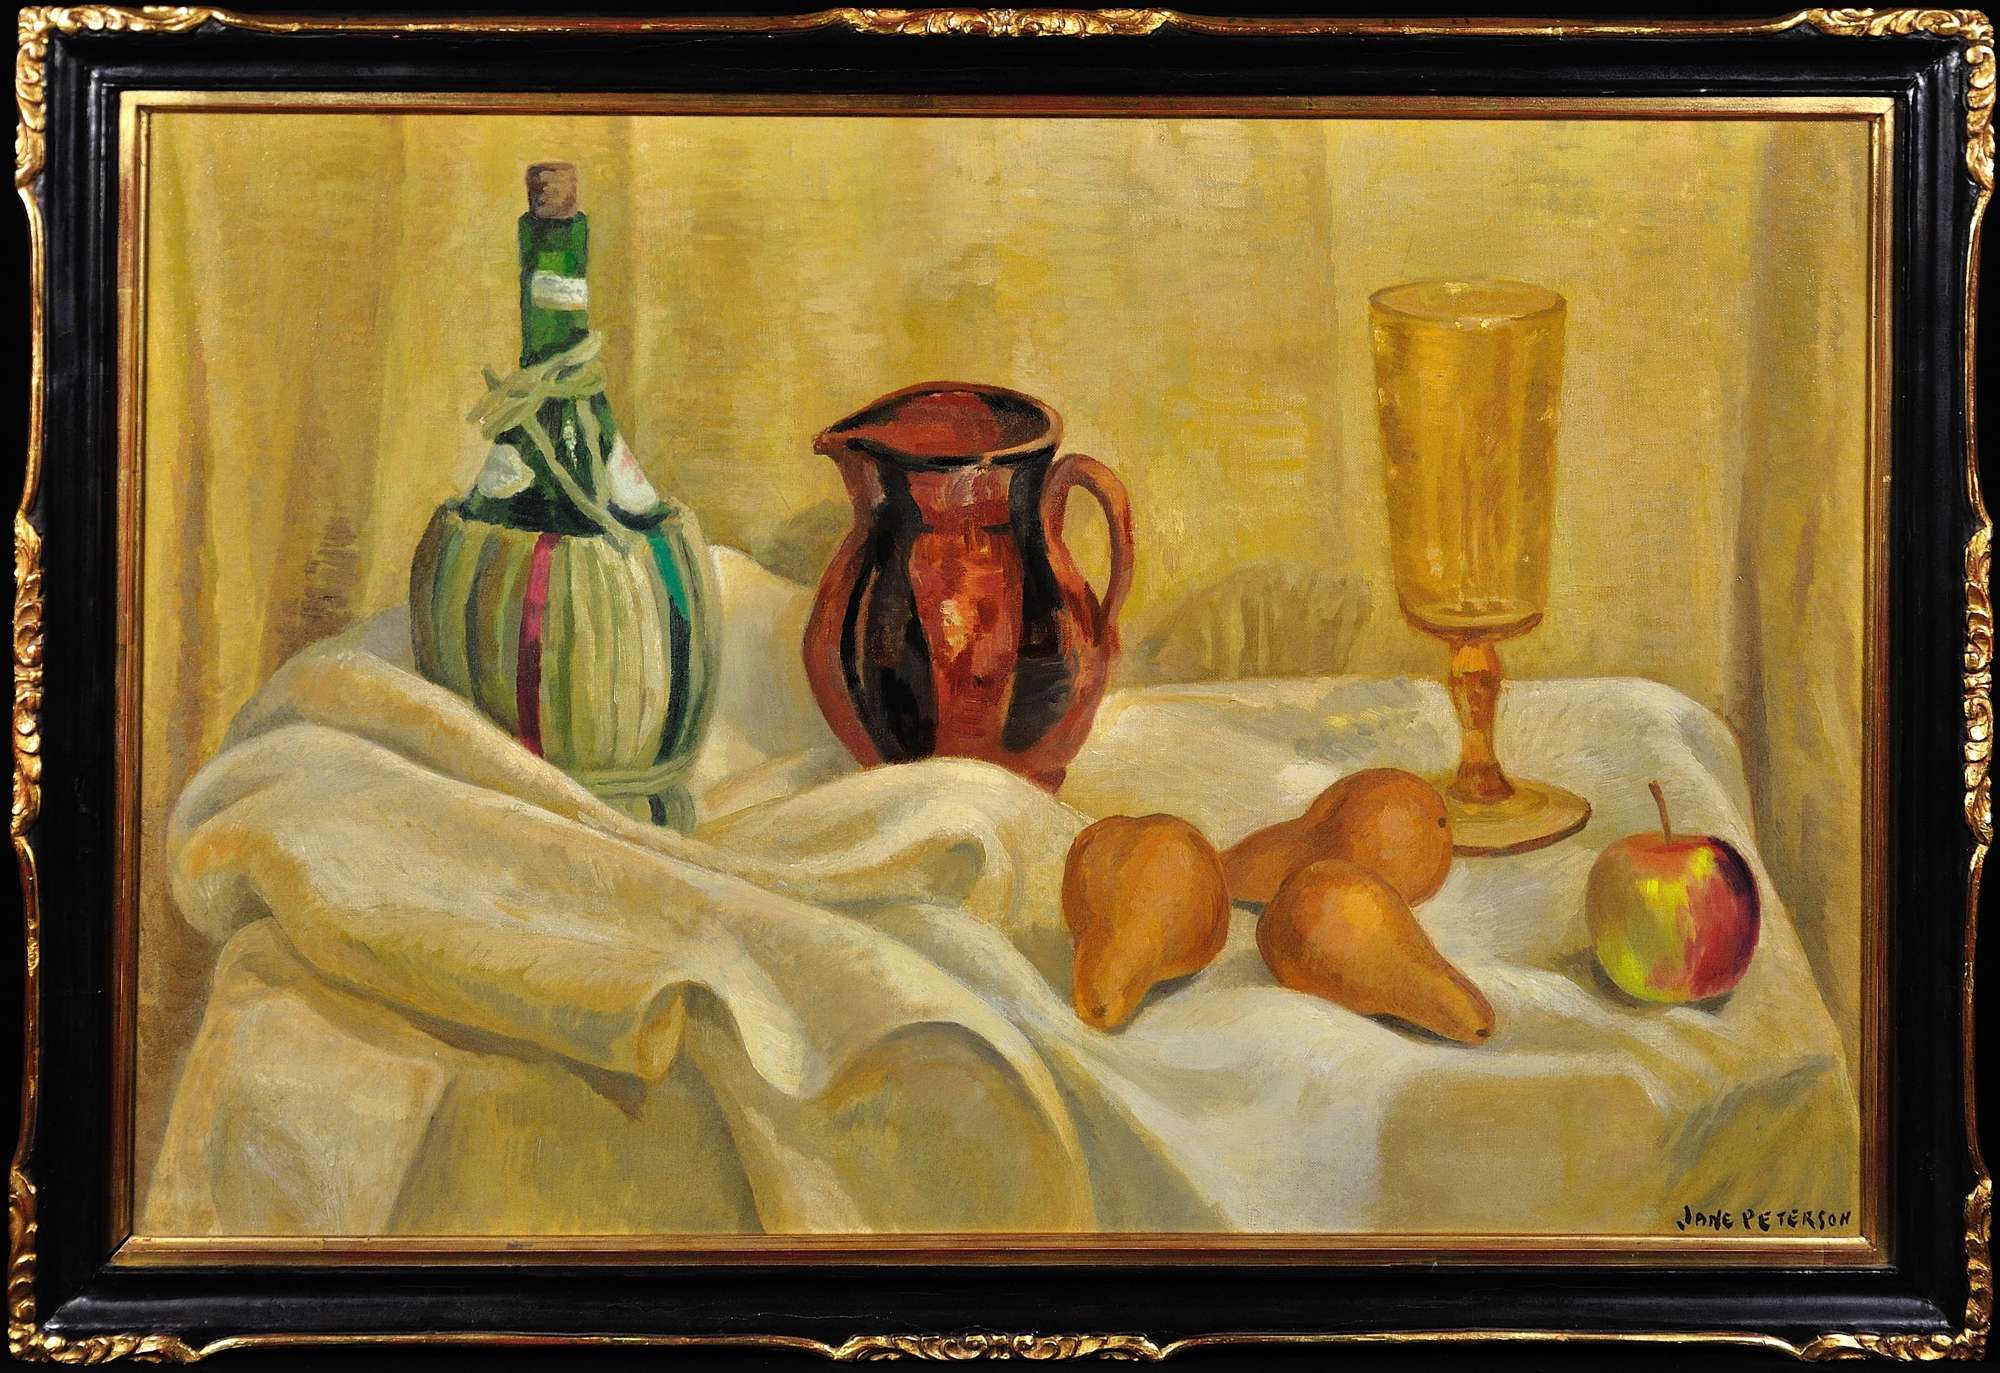 Tuscan Still Life Composition – Early 20th Century Oil Painting. Signed Jane Peterson.